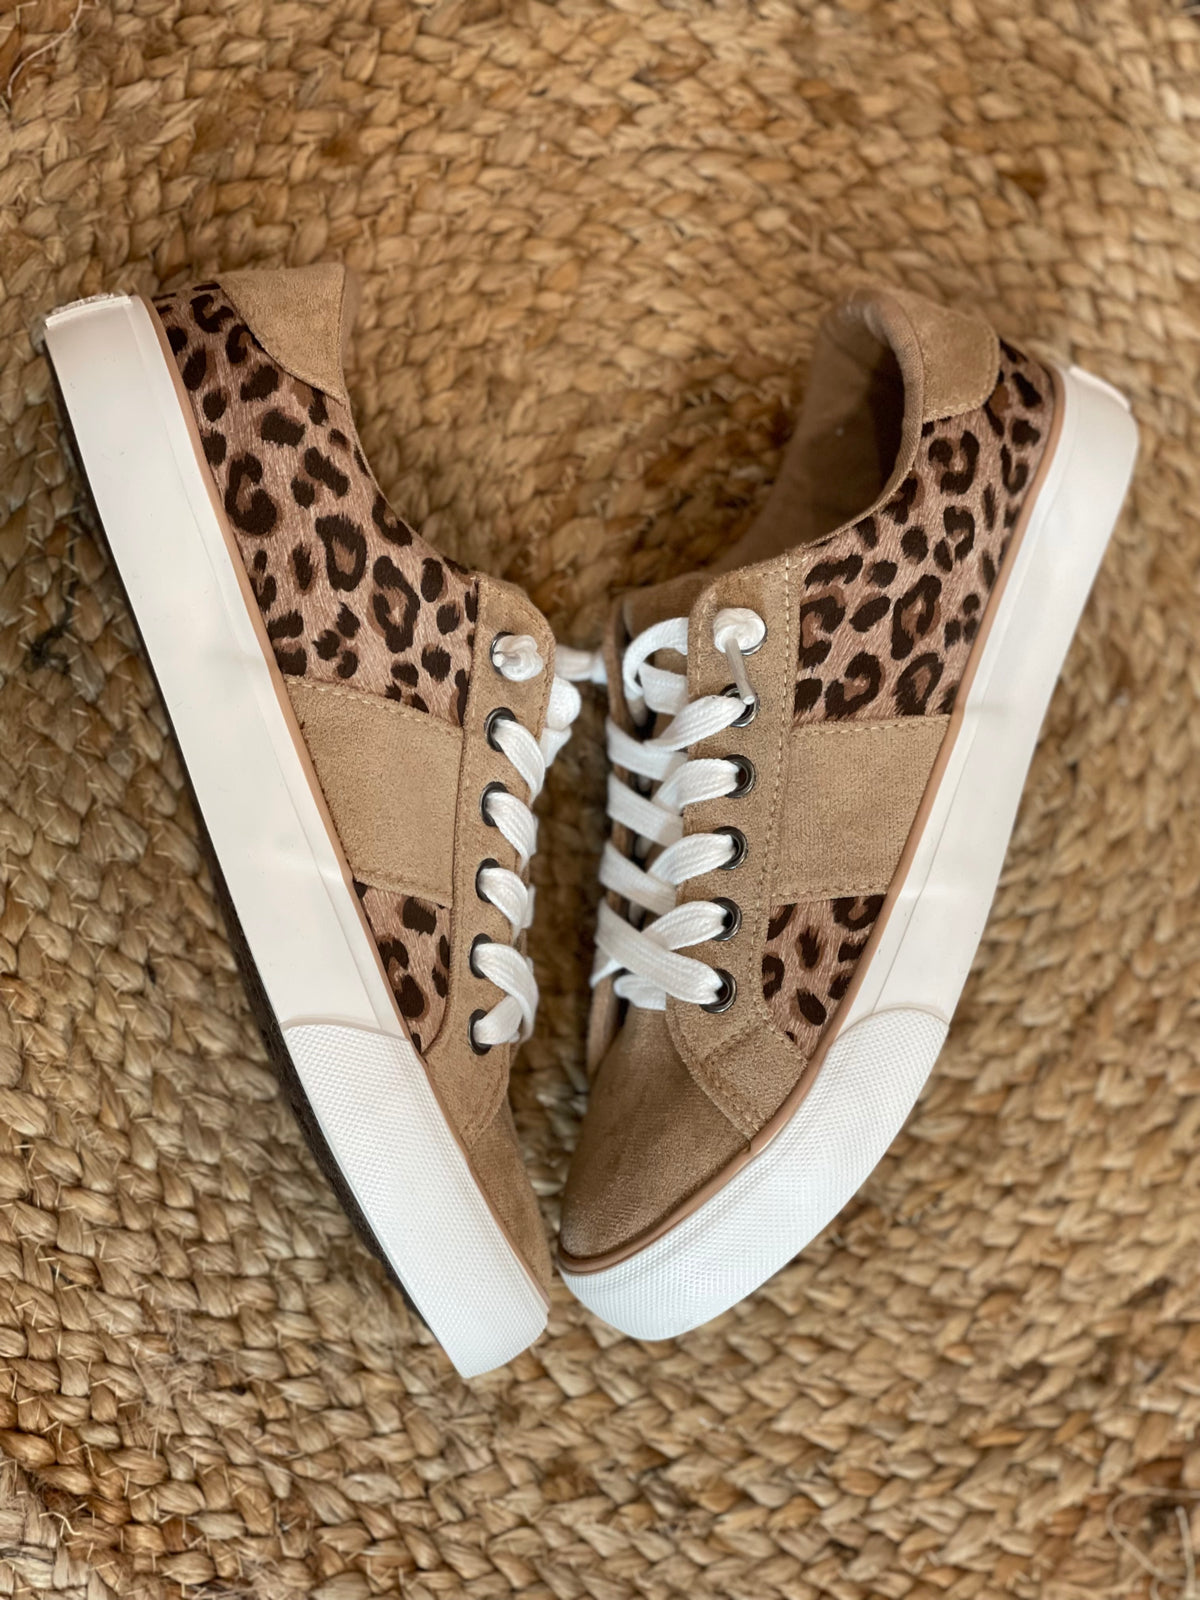 The softest Leopard sneakers